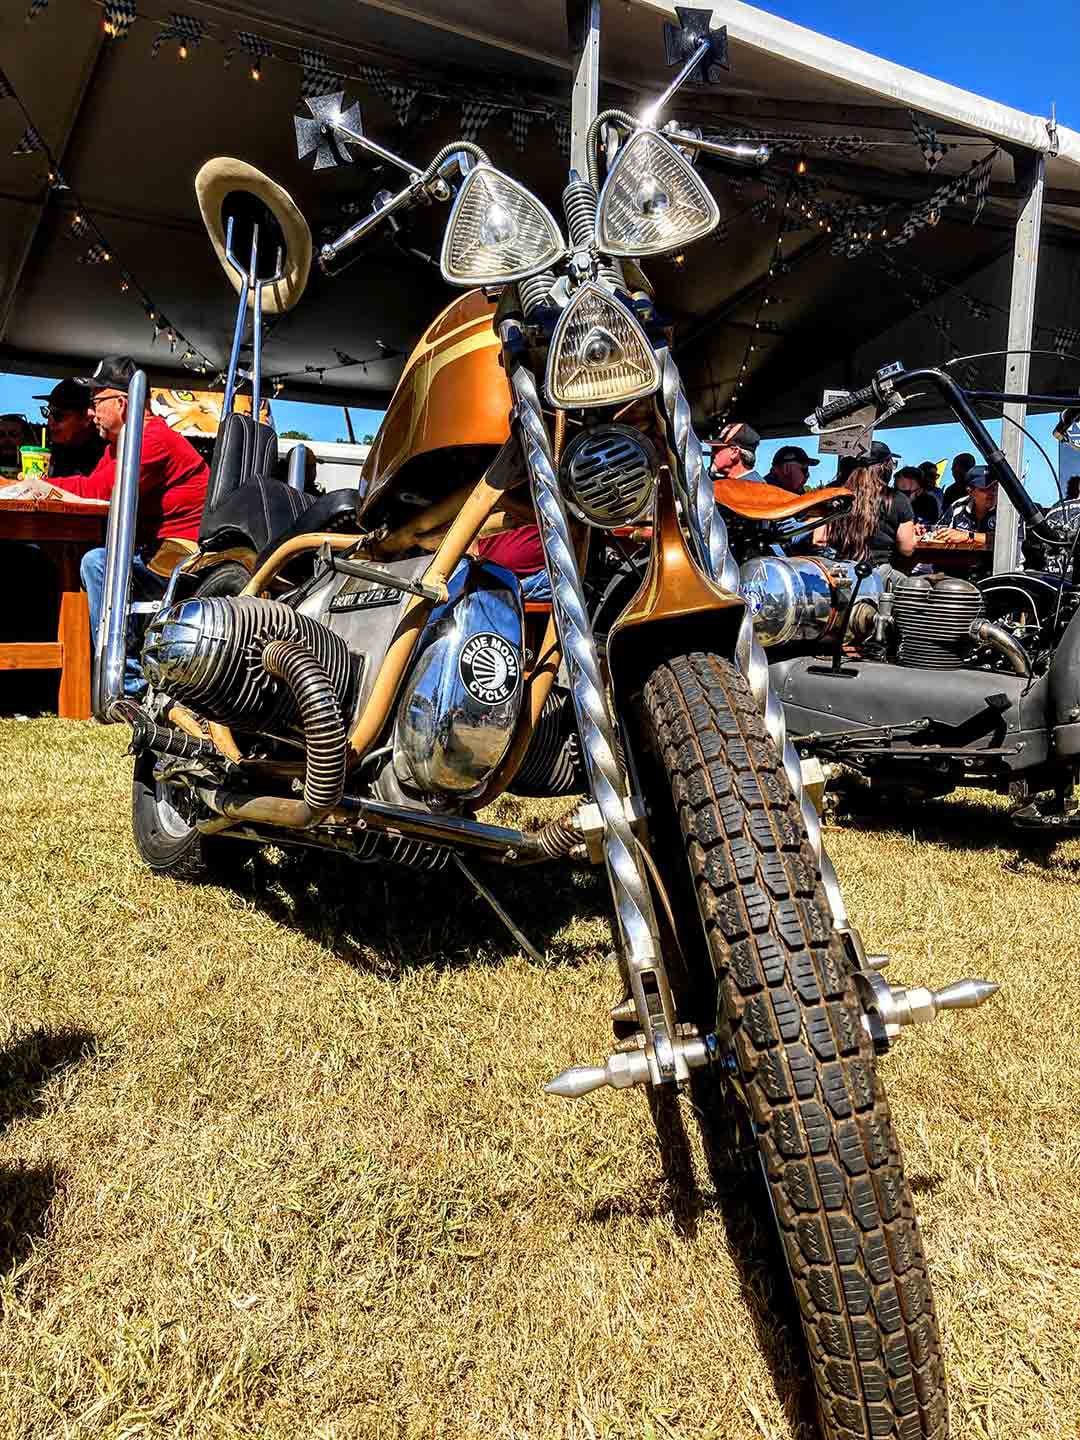 Early inspo for the R 18? Likely not. R 75/5 chopper takes center stage at the BMW Motorrad Days Fun Zone bike show.